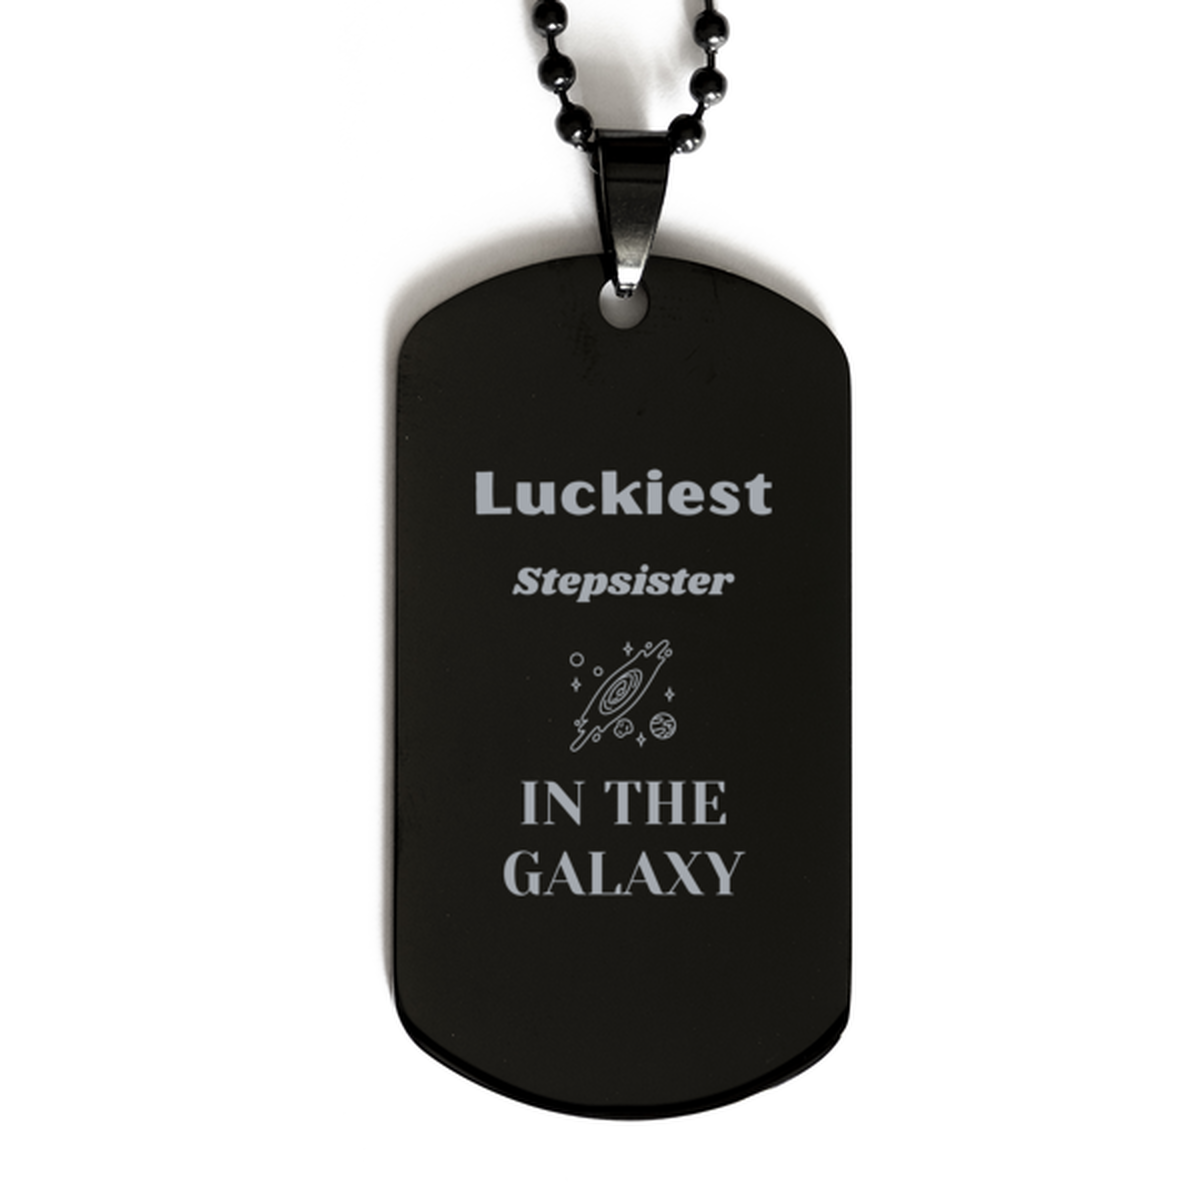 Luckiest Stepsister in the Galaxy, To My Stepsister Engraved Gifts, Christmas Stepsister Black Dog Tag Gifts, X-mas Birthday Unique Gifts For Stepsister Men Women